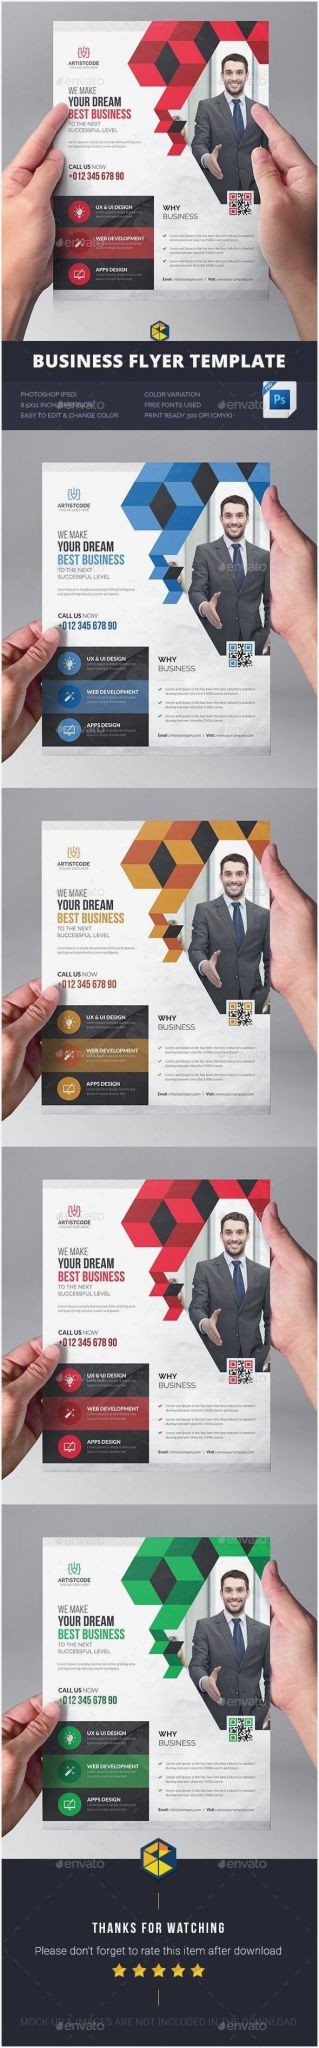 herbalife flyer template along with real estate business card design ideas best auto mechanic of herbalife flyer template